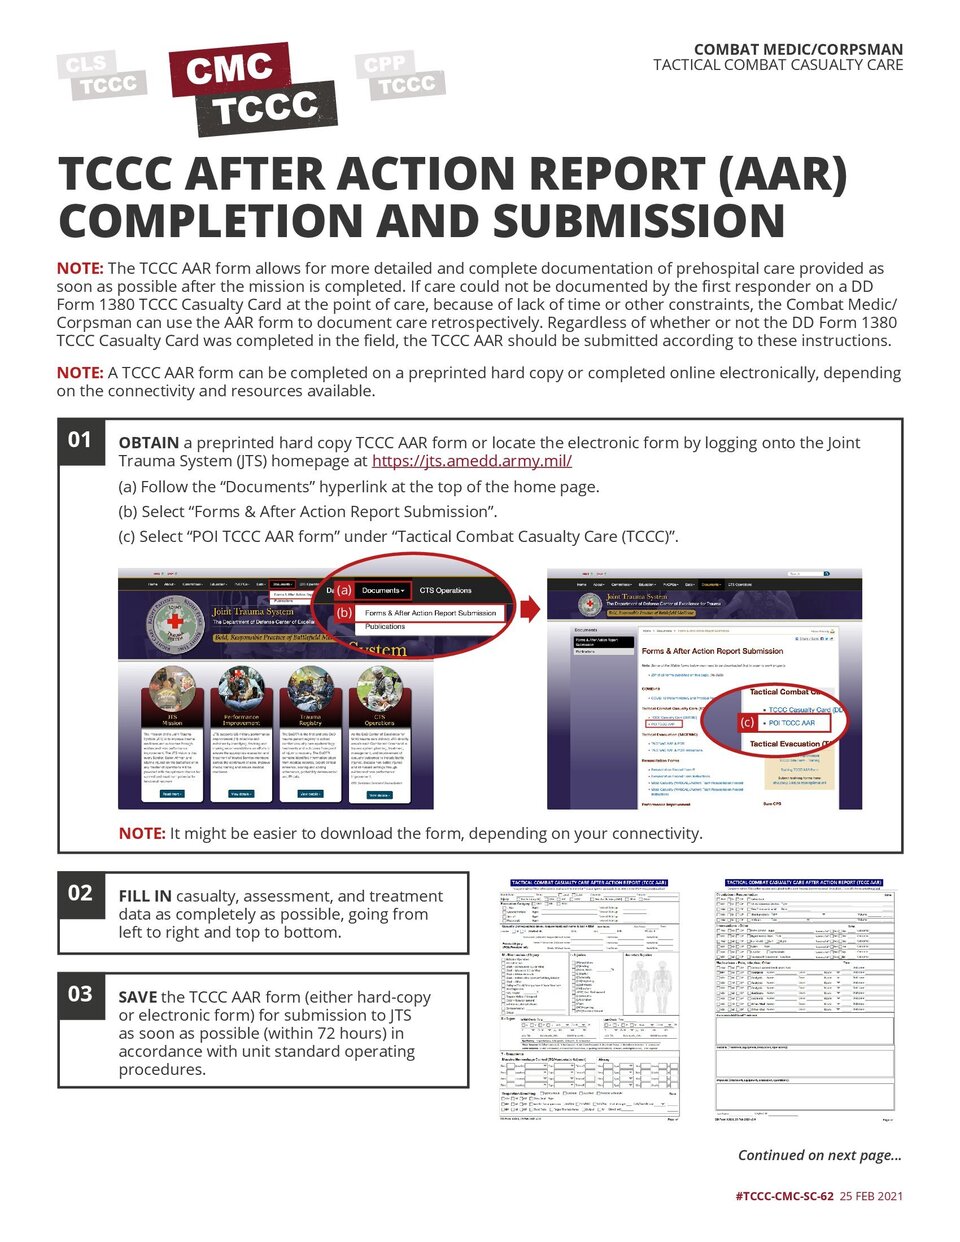 TCCC After Action Report (AAR)